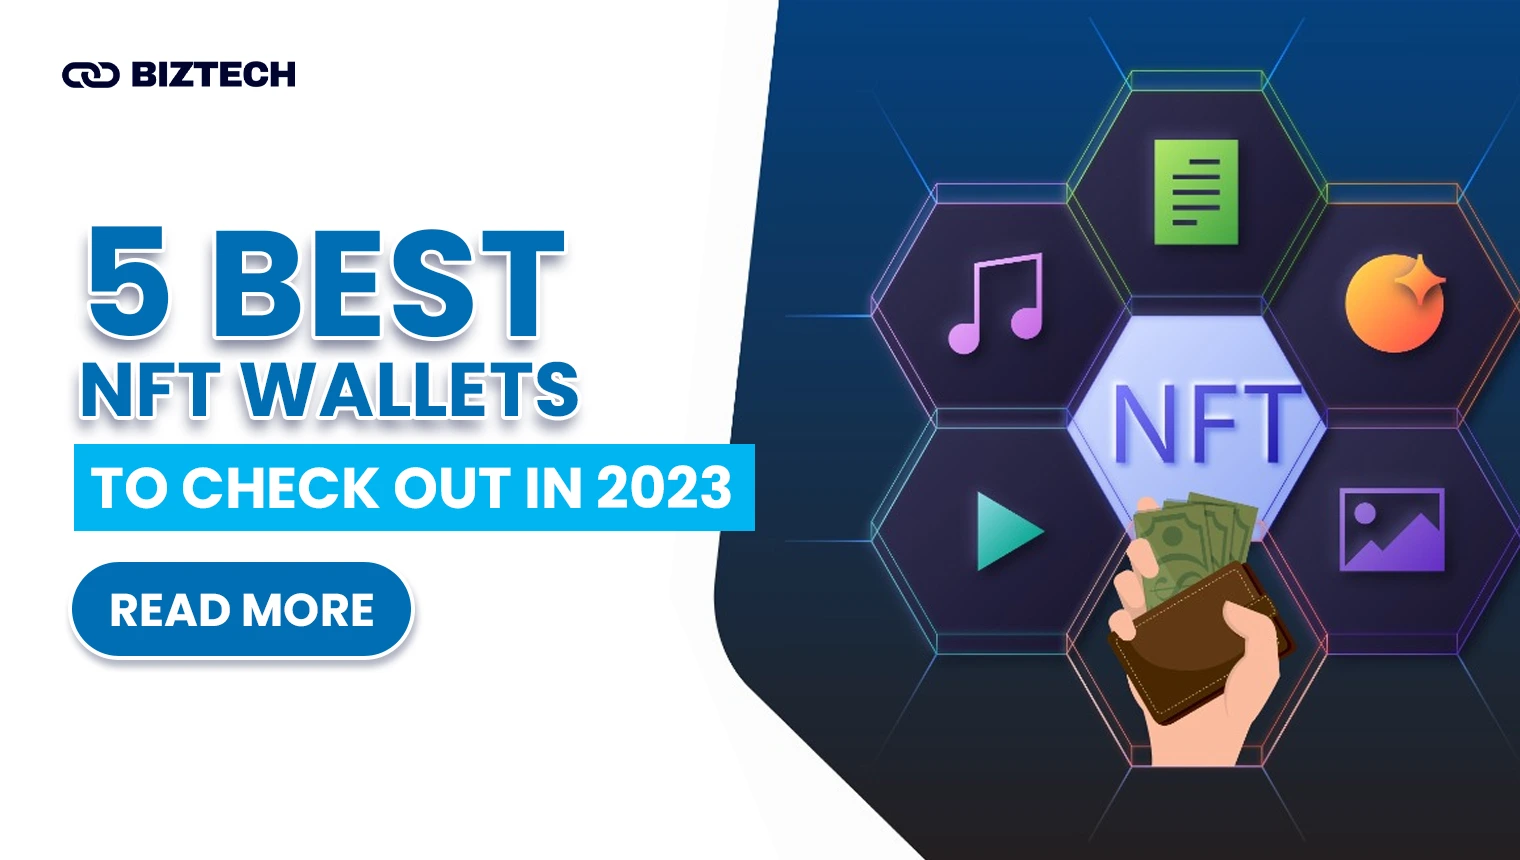 5 Best NFT Wallets to Check Out in 2023